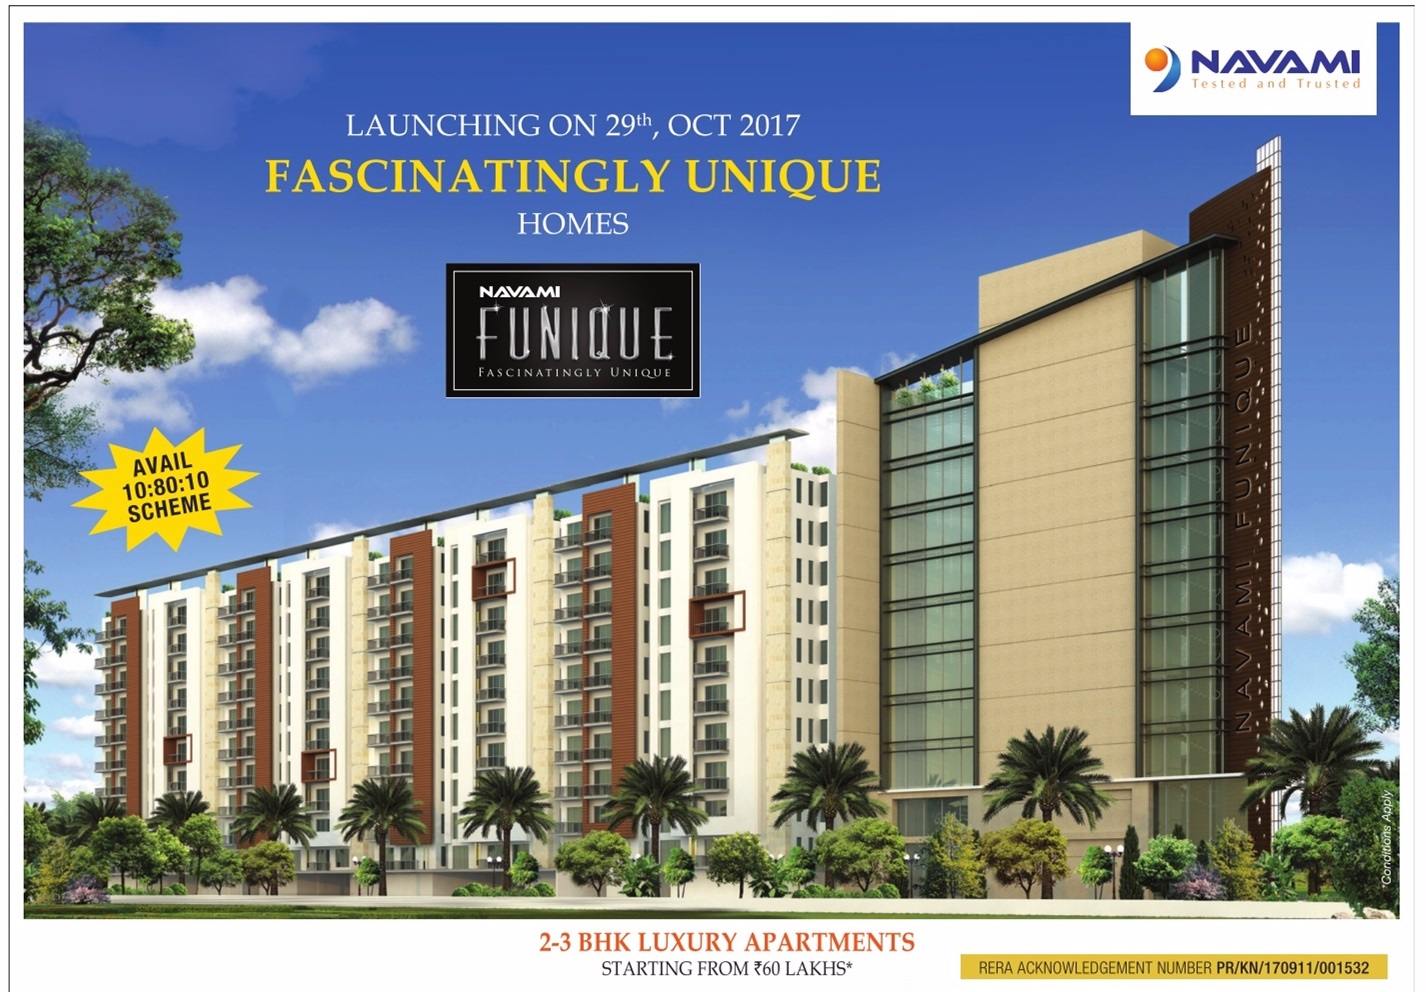 Navami Funique launching on 29th October 2017 in Bangalore